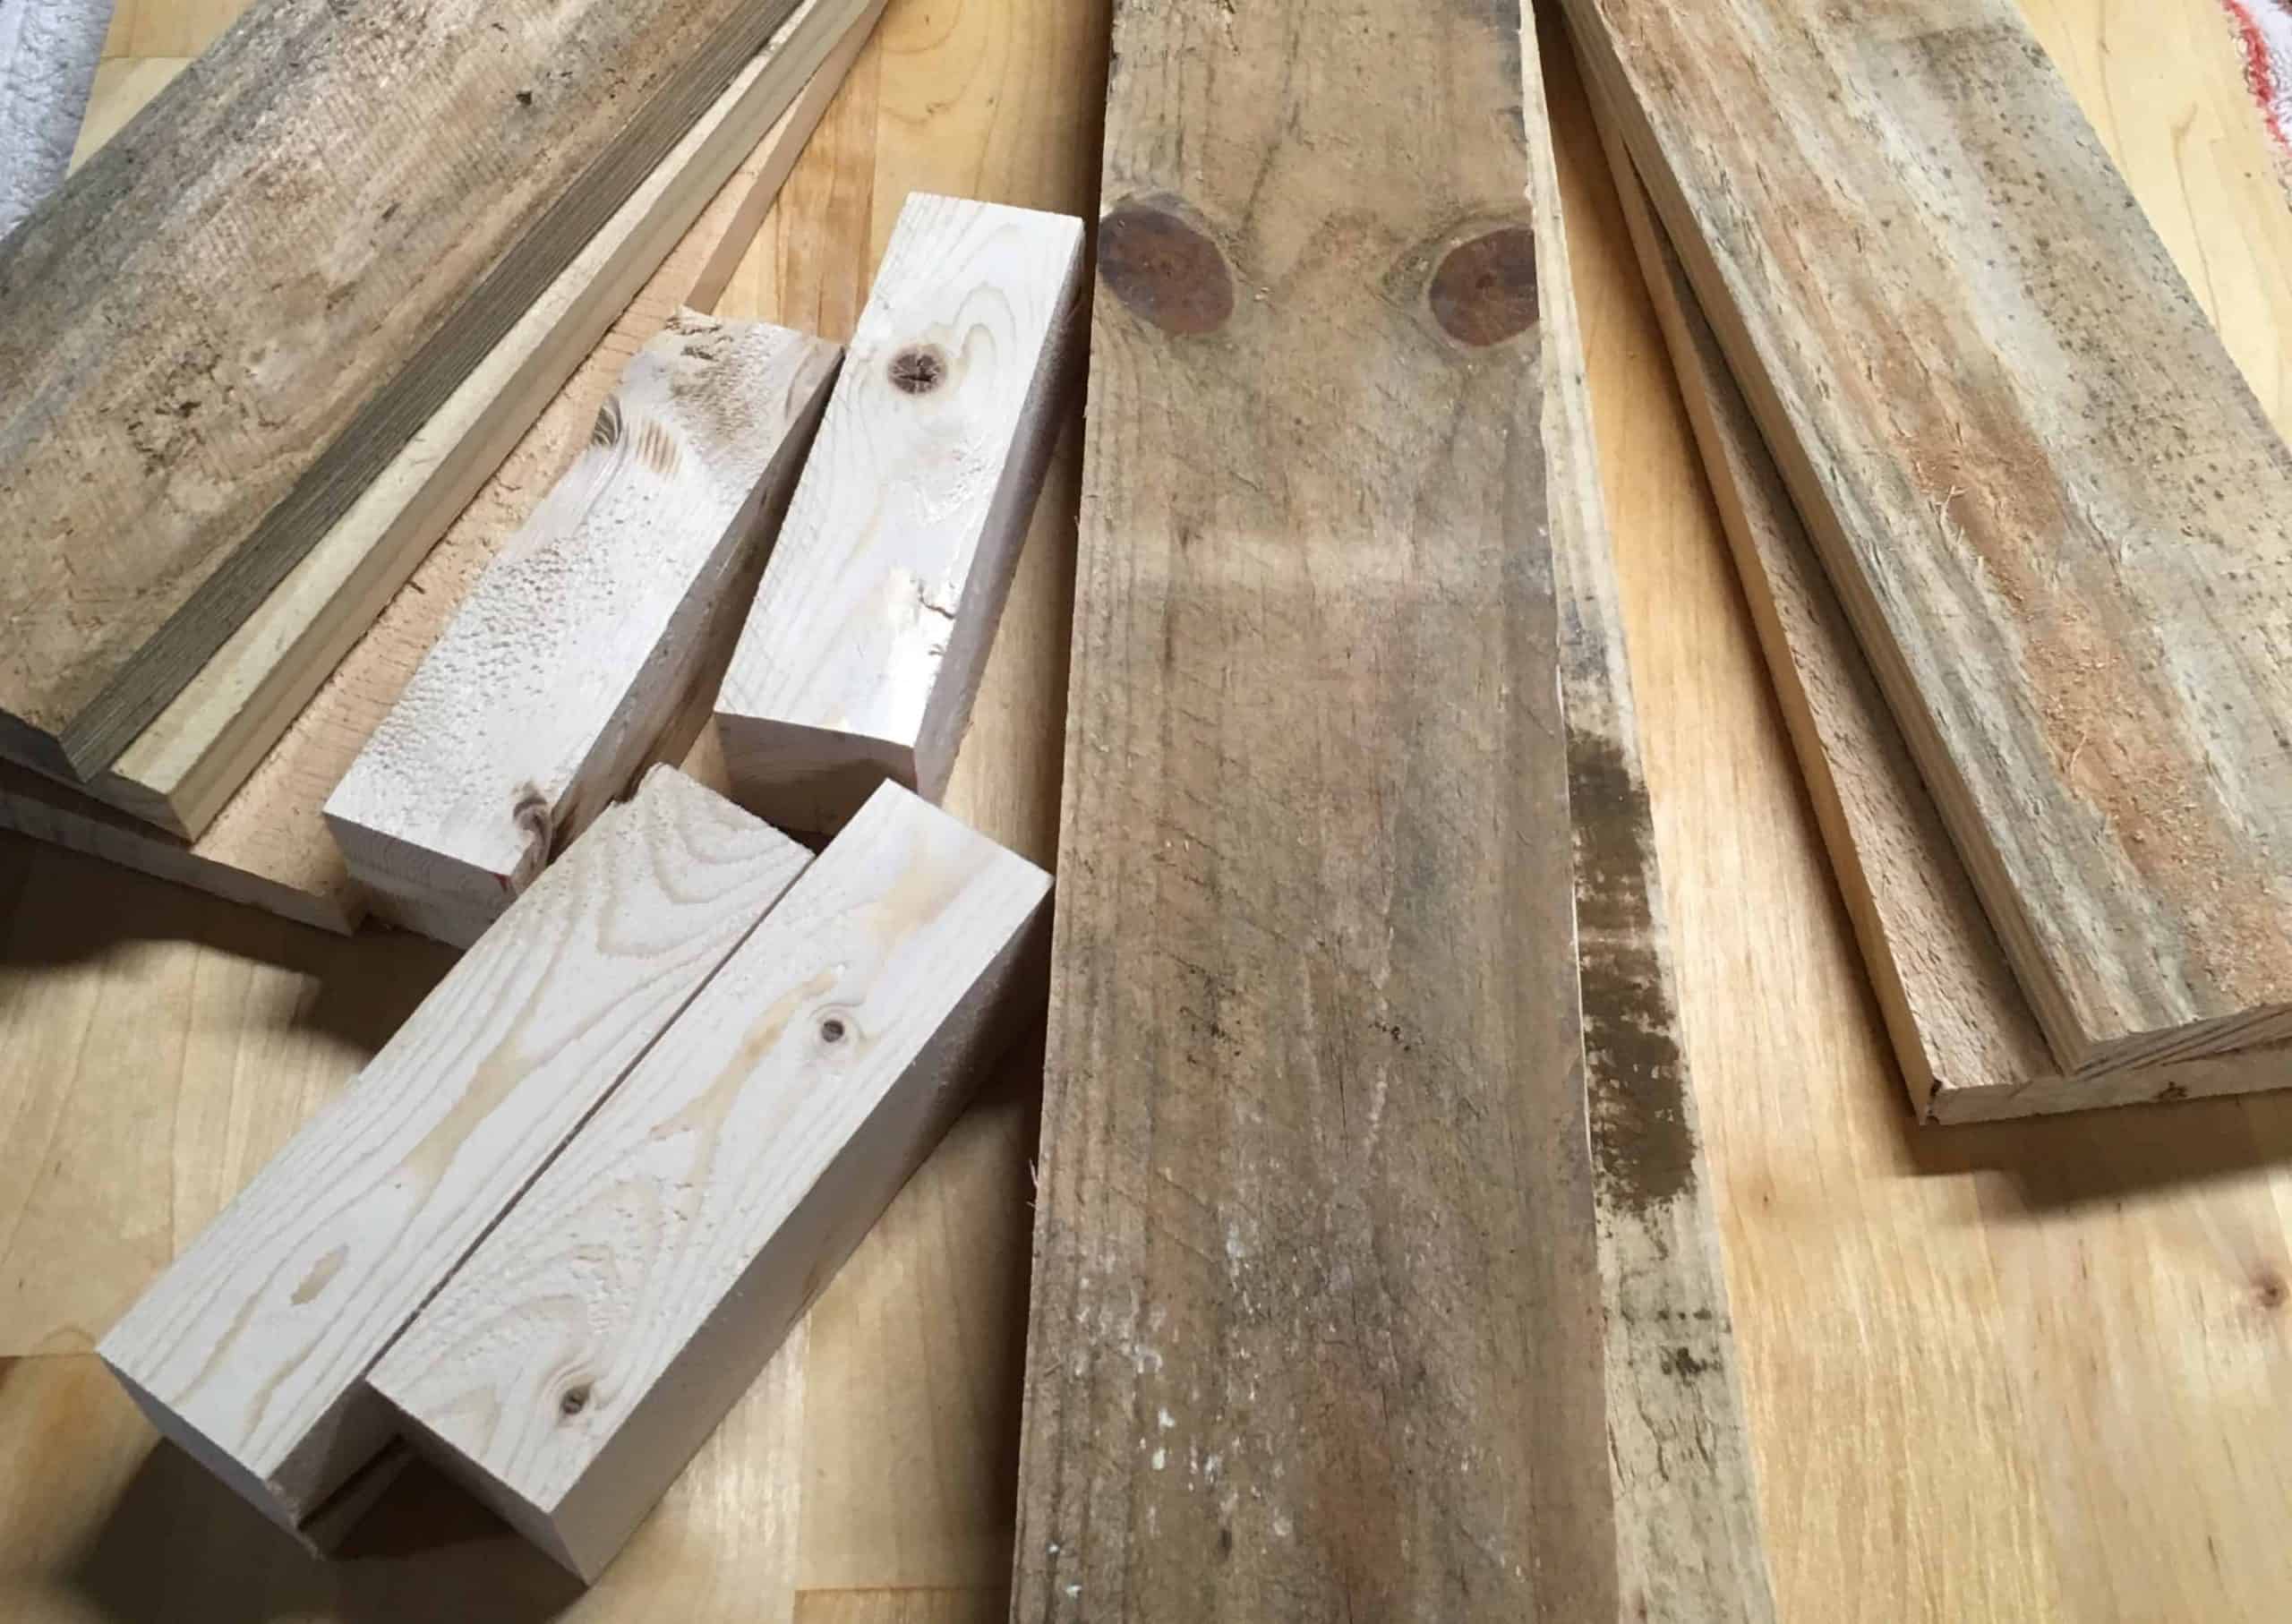 Cut wood in varying lengths and widths to make a DIY pallet crate for a rustic farmhouse decoration